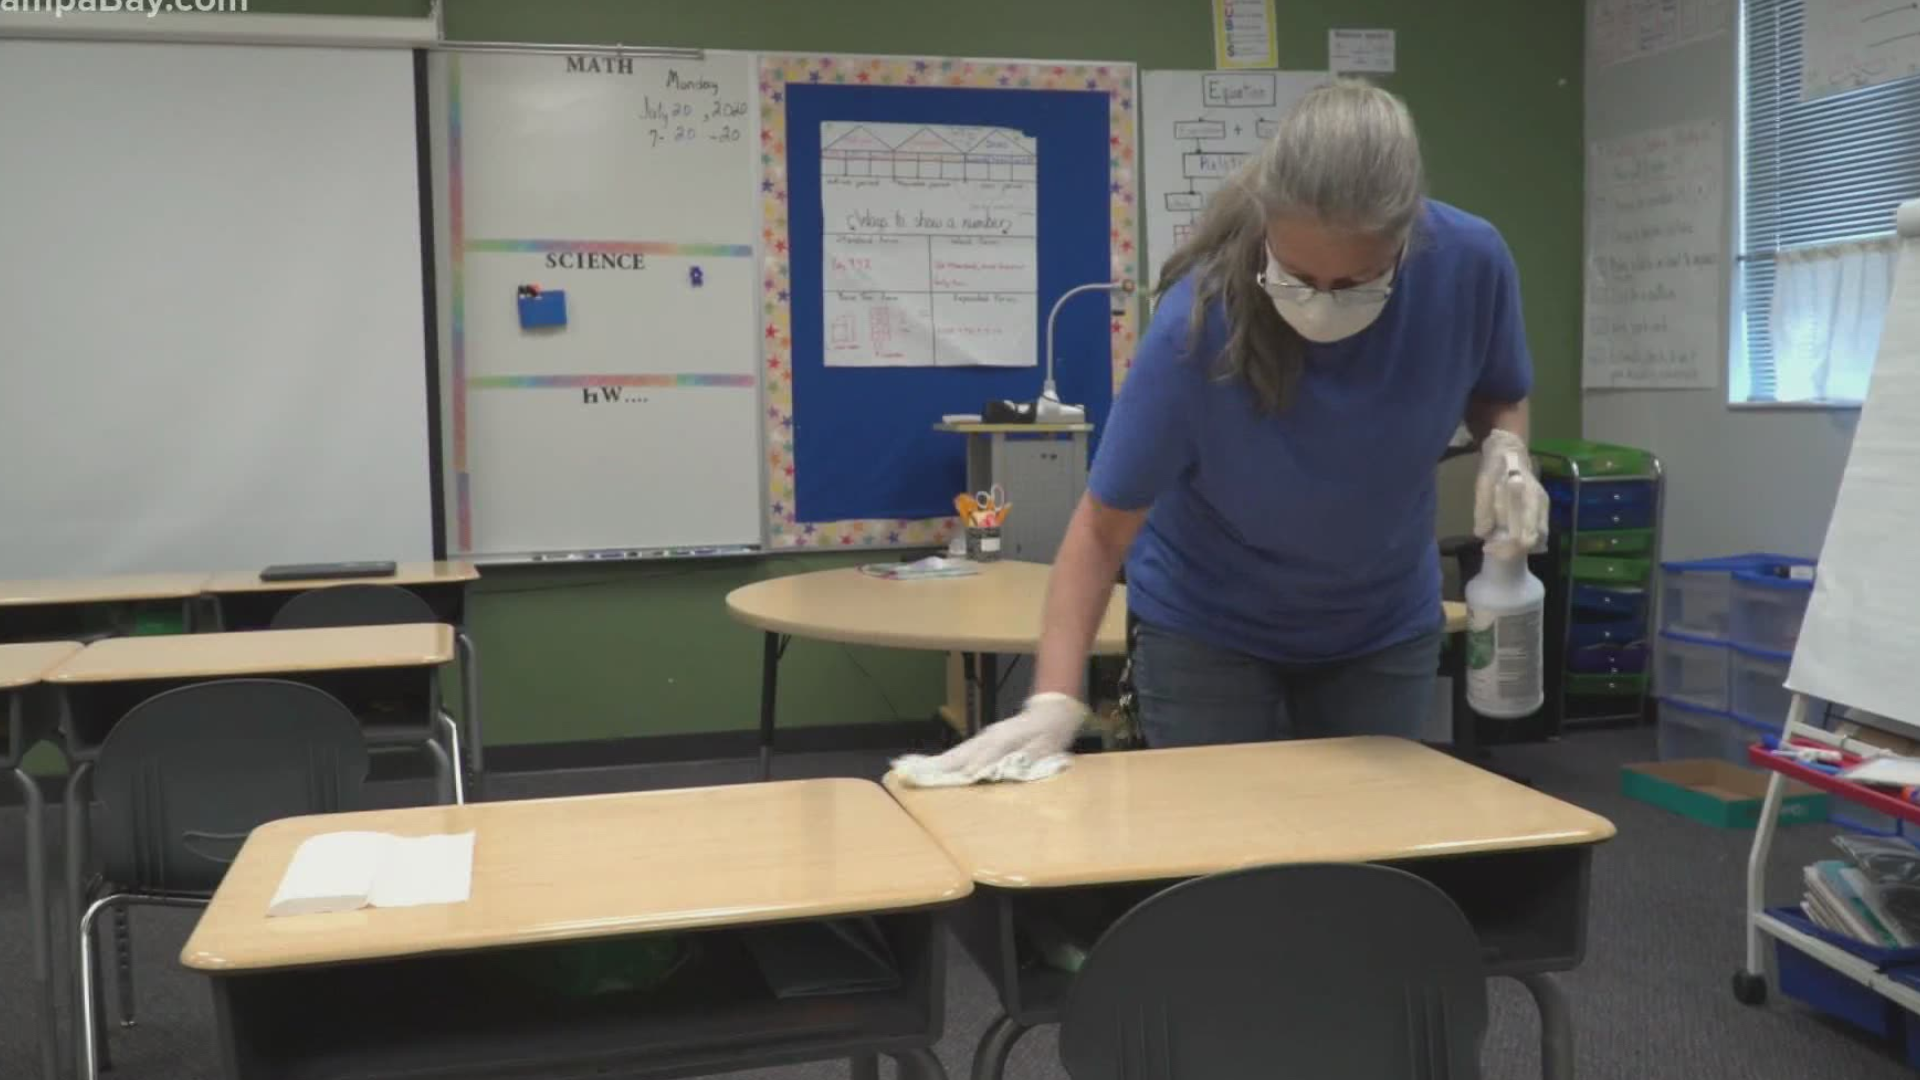 Teachers across Tampa Bay are not only making safety changes to their physical classrooms, but they're also prepping online classes, too, just in case.